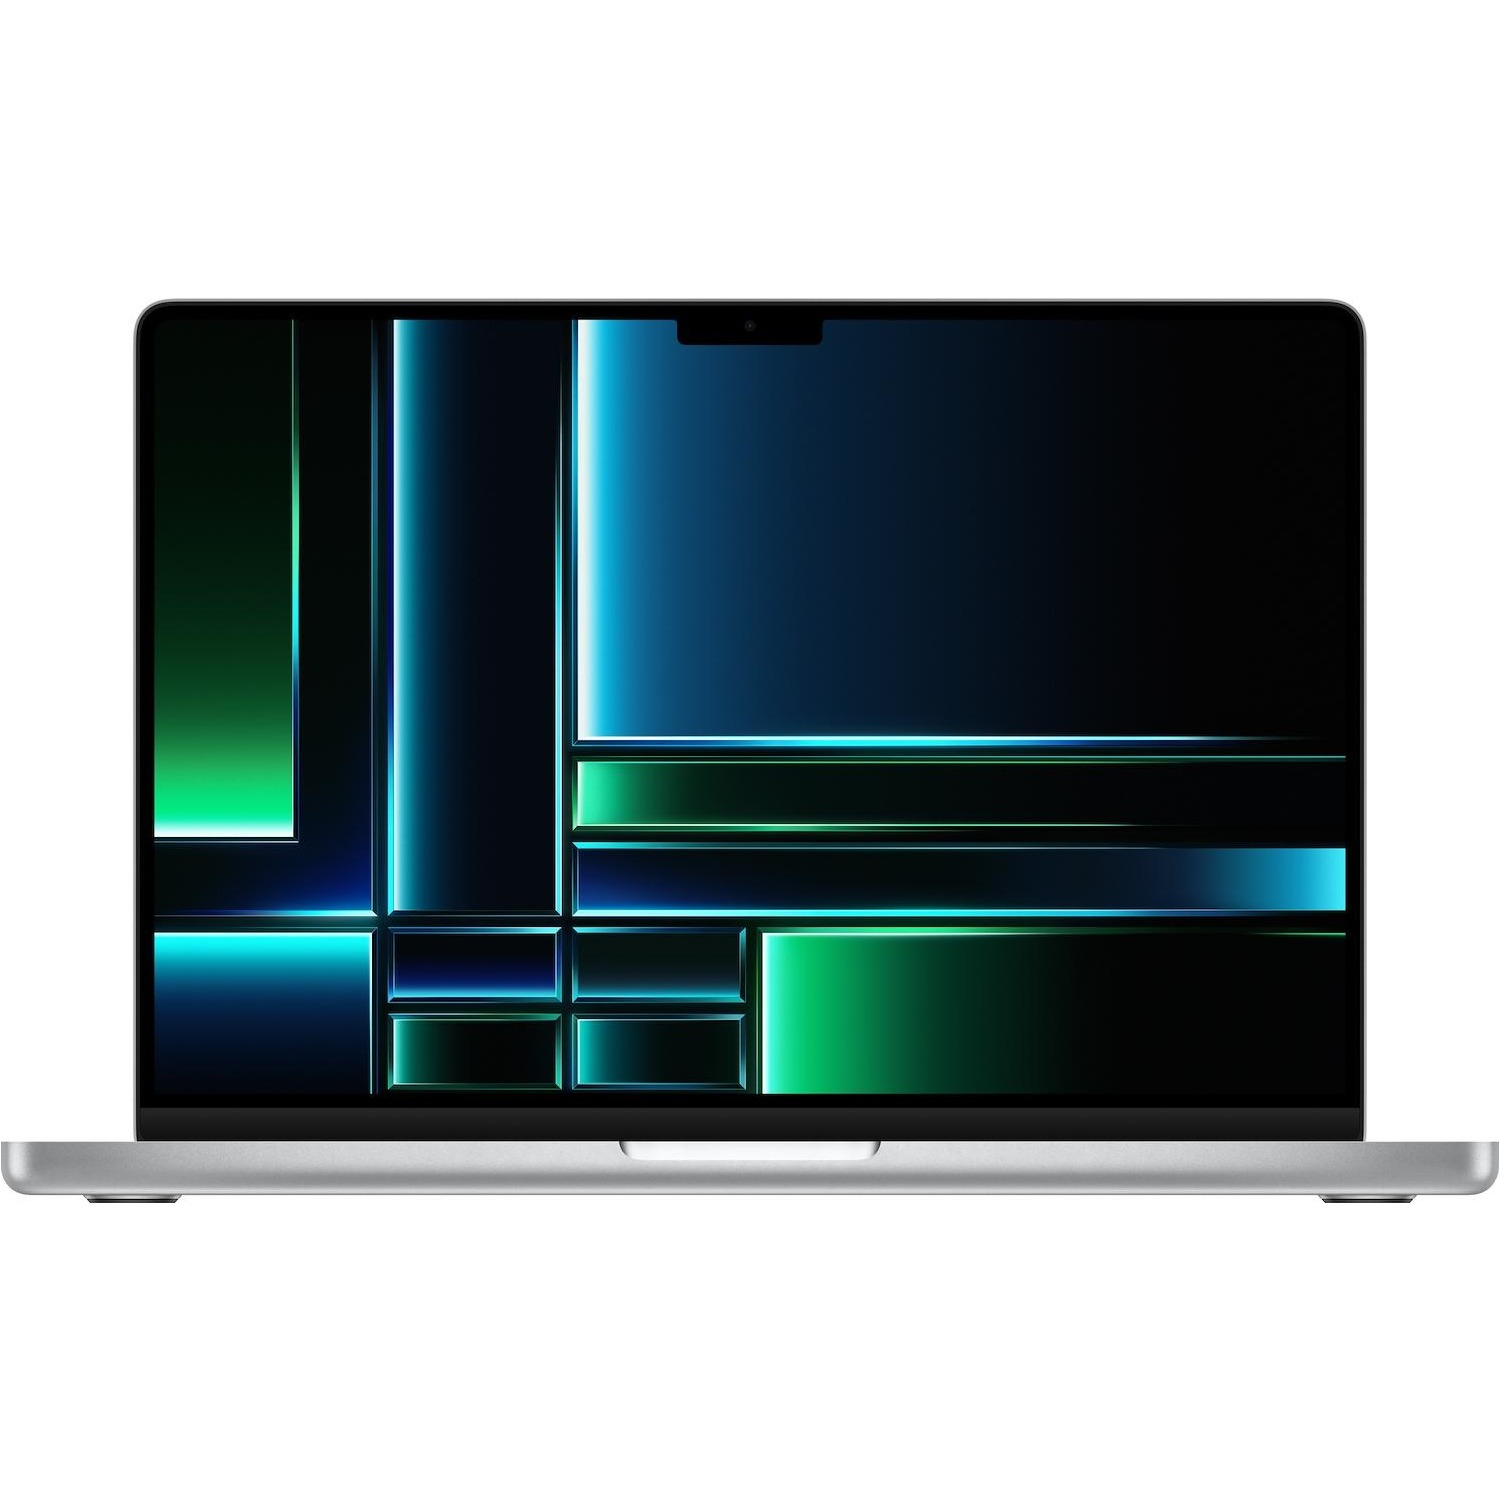 Image of 14-inch MacBook Pro: Apple M2 Pro chip with 10-core CPU and 16-core GPU 512GB SSD - Silver